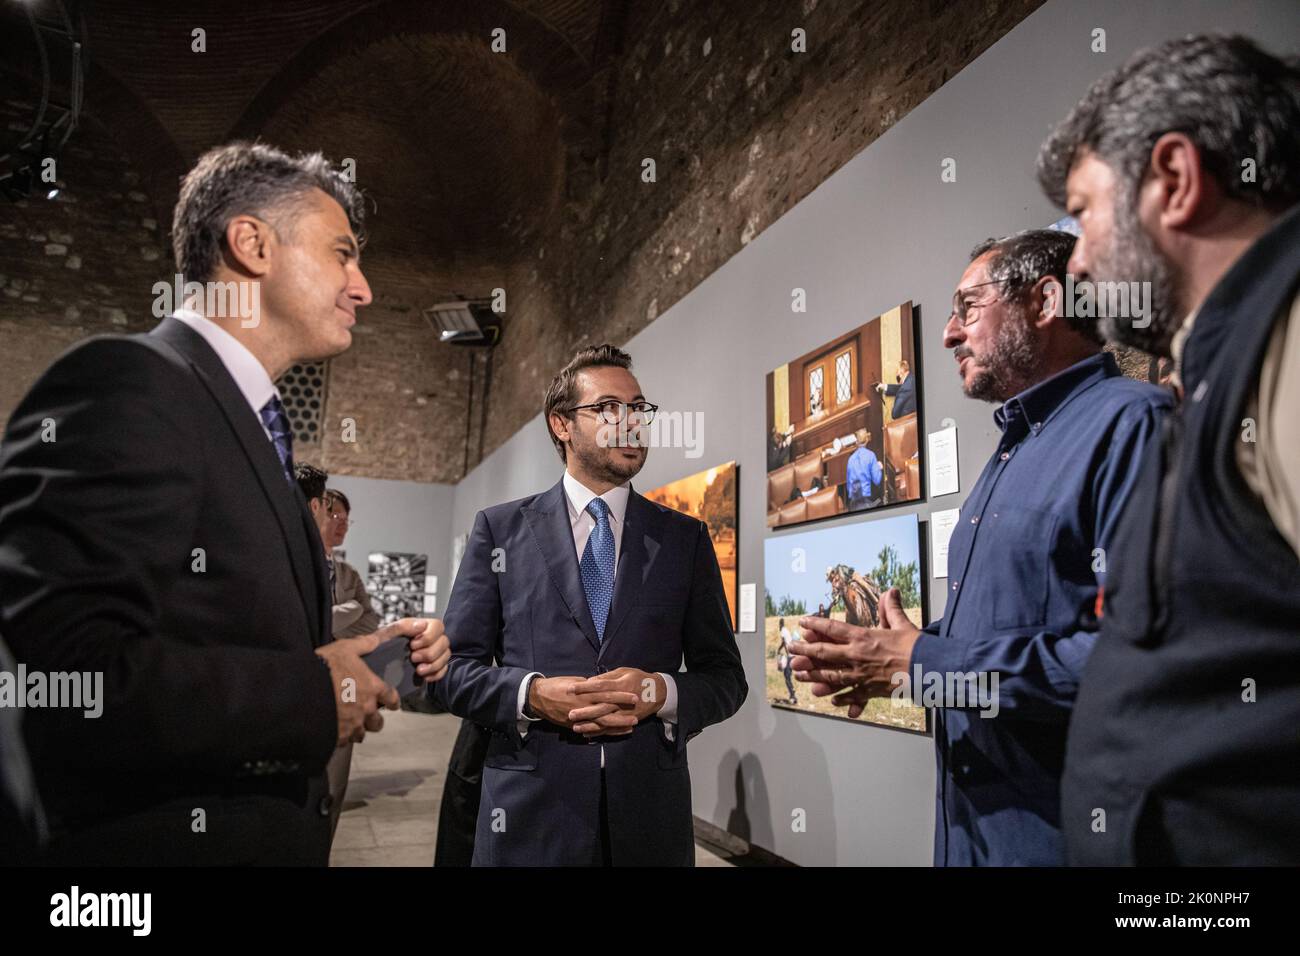 Istanbul, Turkey, 12/09/2022, Anadolu Agency General Manager Serdar Karagoz (left2) and Anadolu Agency Visual News Editor Firat Yurdakul (left1) seen talking to the guests about the exhibition. Istanbul Photo Awards 2022 Exhibition At Mimar Sinan Fine Arts University Tophane-i Amire Culture and Art Center, at the Single Dome building, with the participation of Anadolu Agency General Manager Serdar Karagoz, after the opening speech, Mimar Sinan Fine Arts University Rector Prof. Dr. Handan ?nci Elci opened with the presence of Beyoglu Mayor Haydar Ali Yildiz and guests. Award-winning photographs Stock Photo